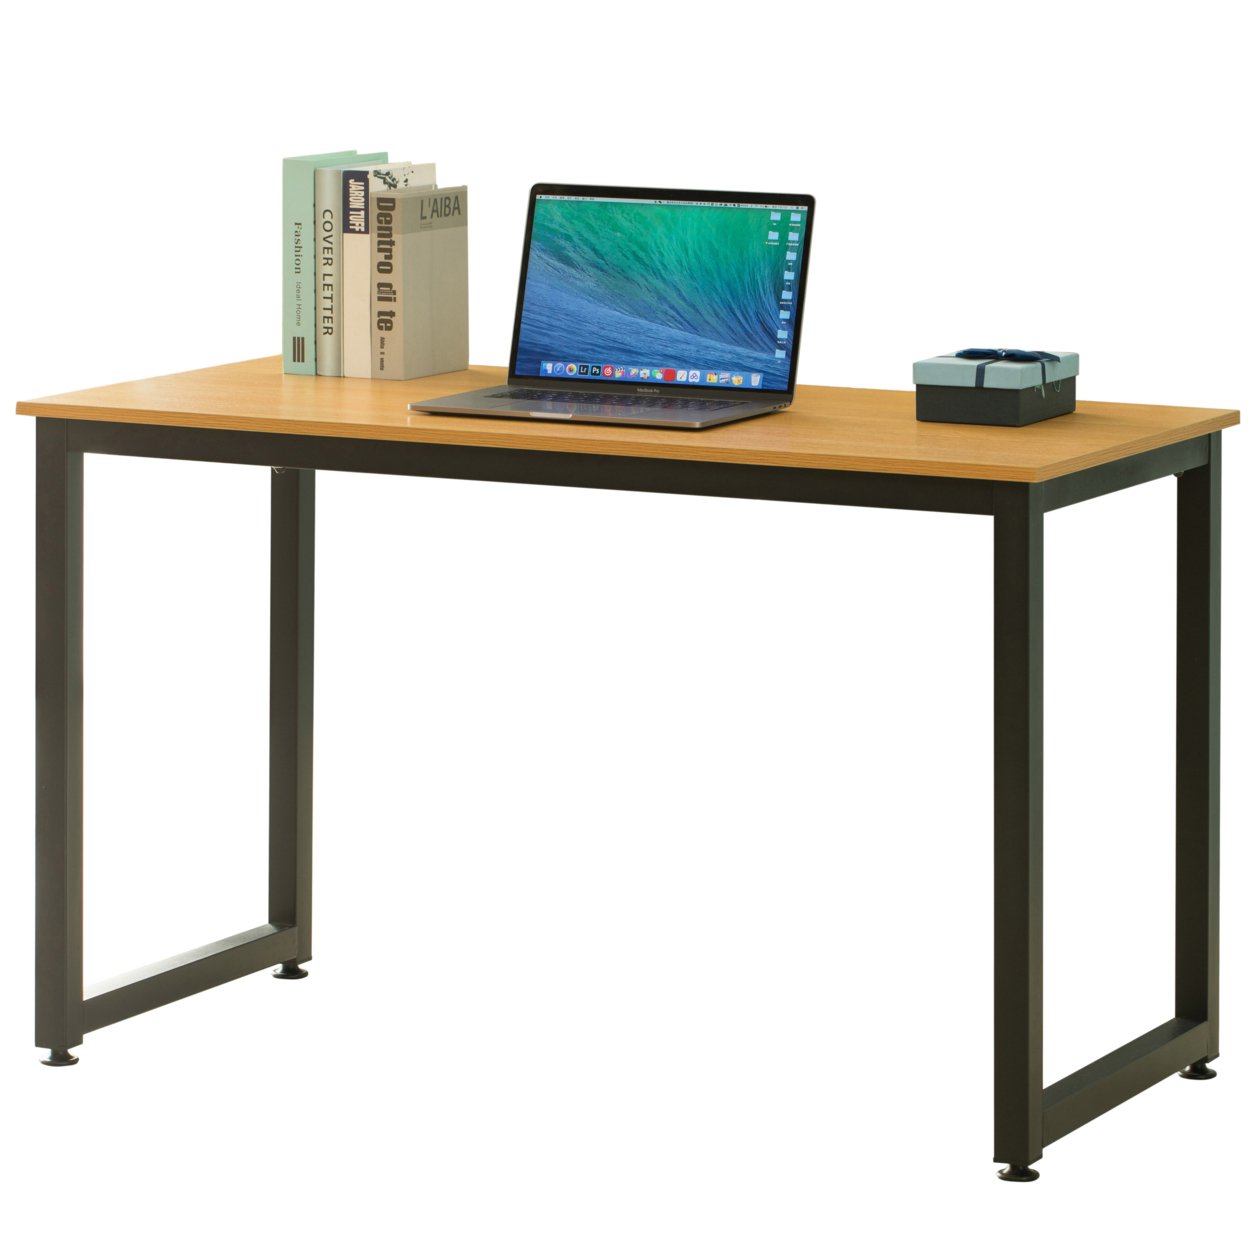 Wooden Writing Desk Homes Office Table With Sturdy Metal Frame - Natural